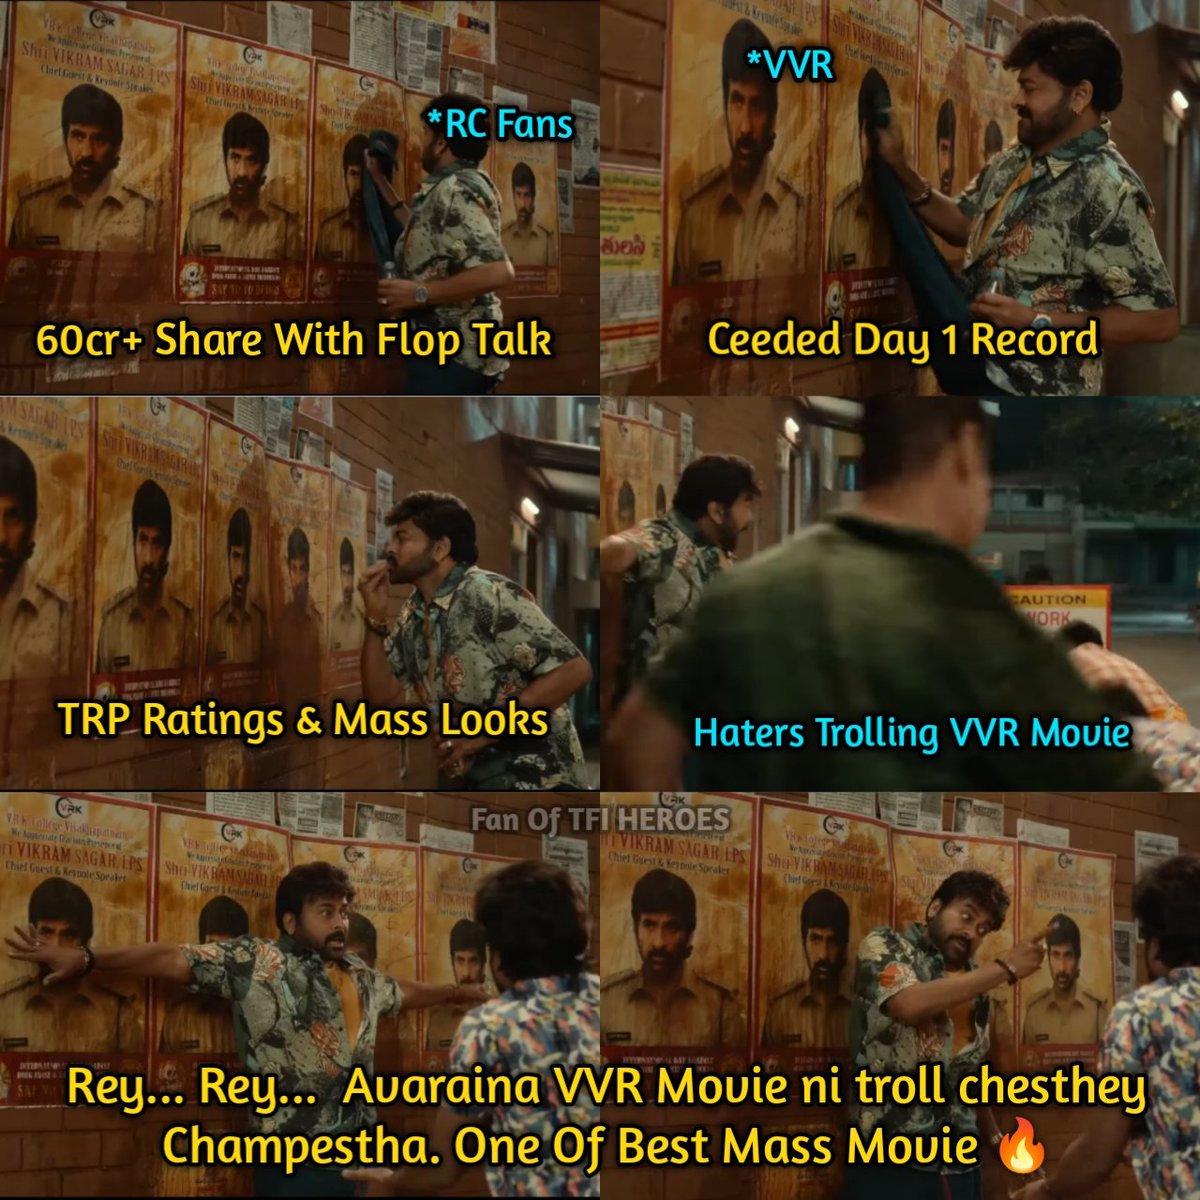 One Of Best In Mass Movie #VVR 
Flop Talk tho 60cr+ share 🥵🥵 

Follow And Support For More
#5YearsForVinayaVidheyaRama 
#RamCharan #BoyapatiSrinu